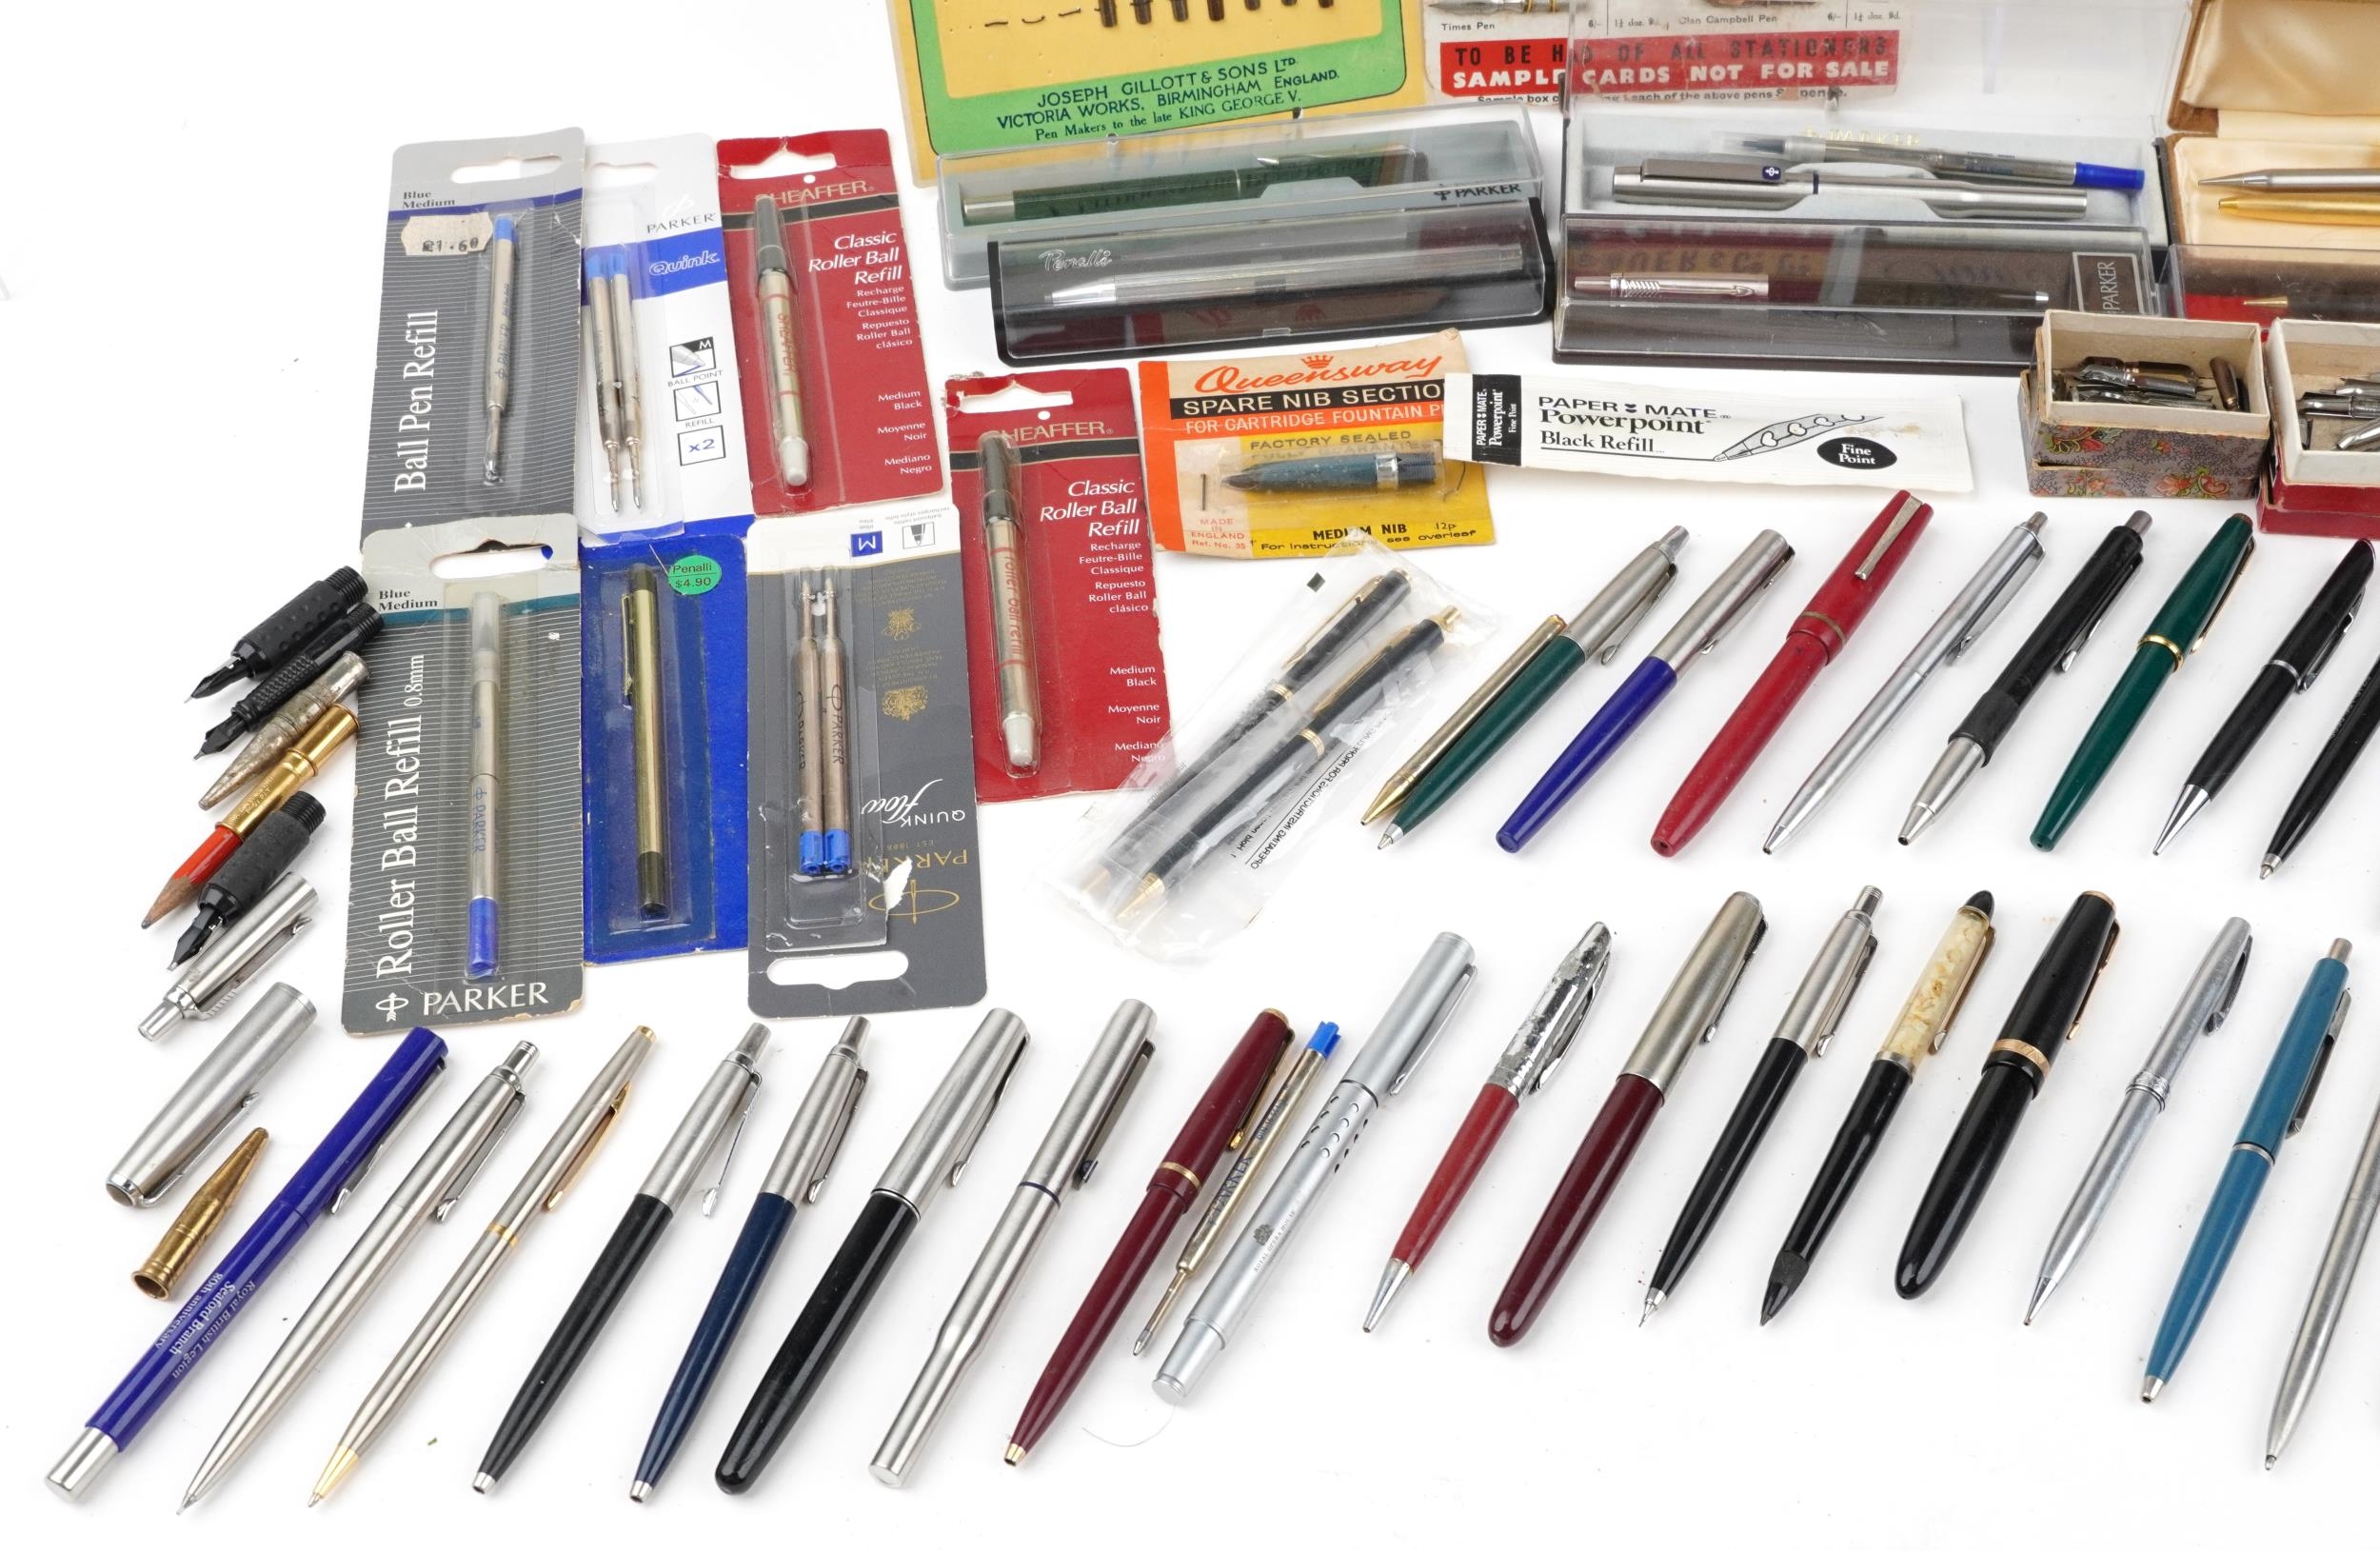 Vintage and later pens and accessories, some fountain pens including Sheaffer and Parker - Image 4 of 5